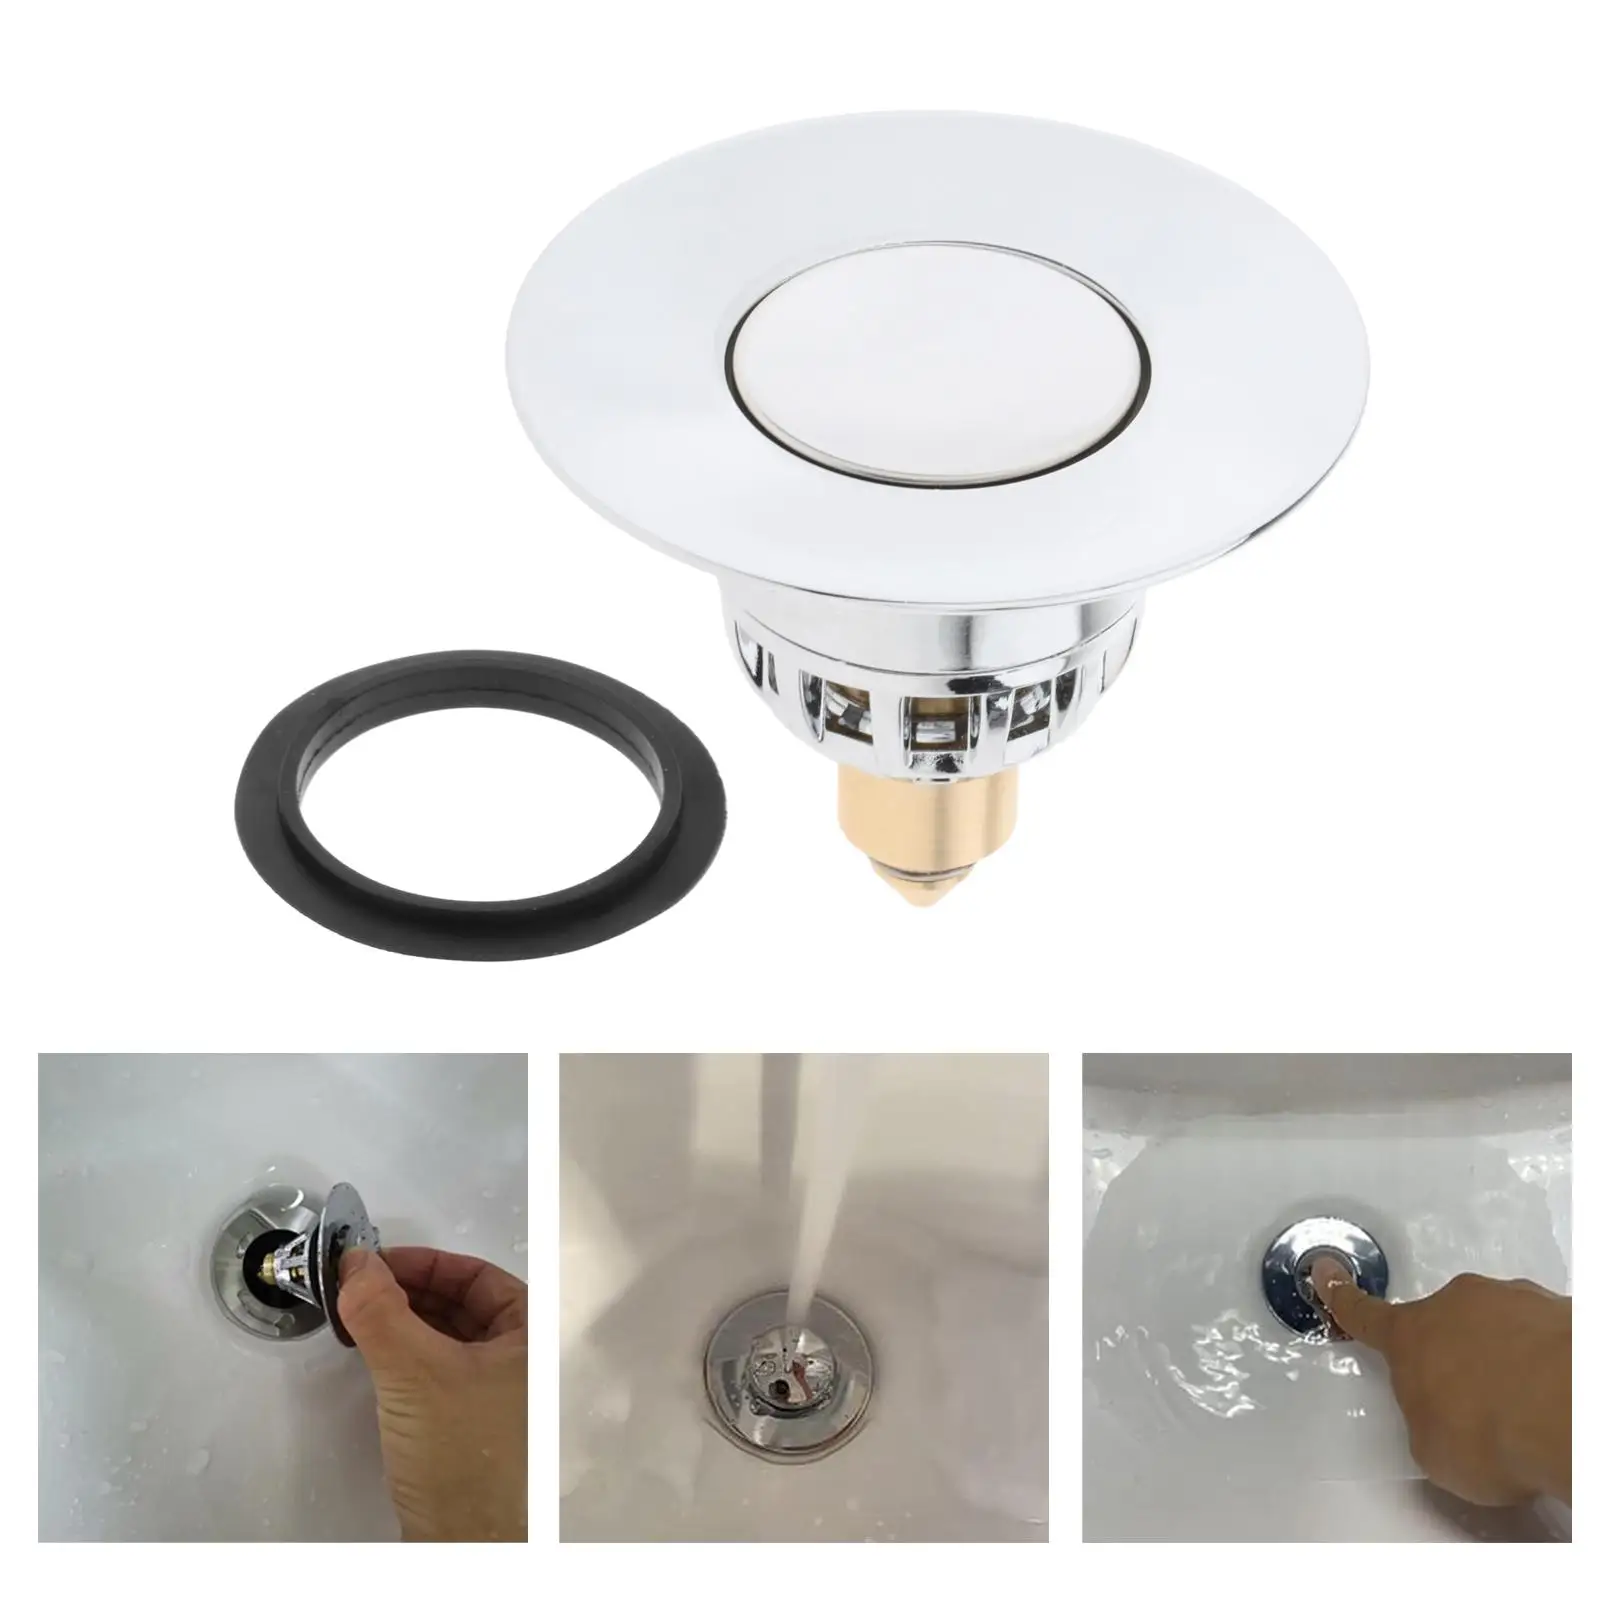 Core Push Type Basin -Sink Plug Drain Filter Stopper for Drain Hole 1.34-1.57 inches